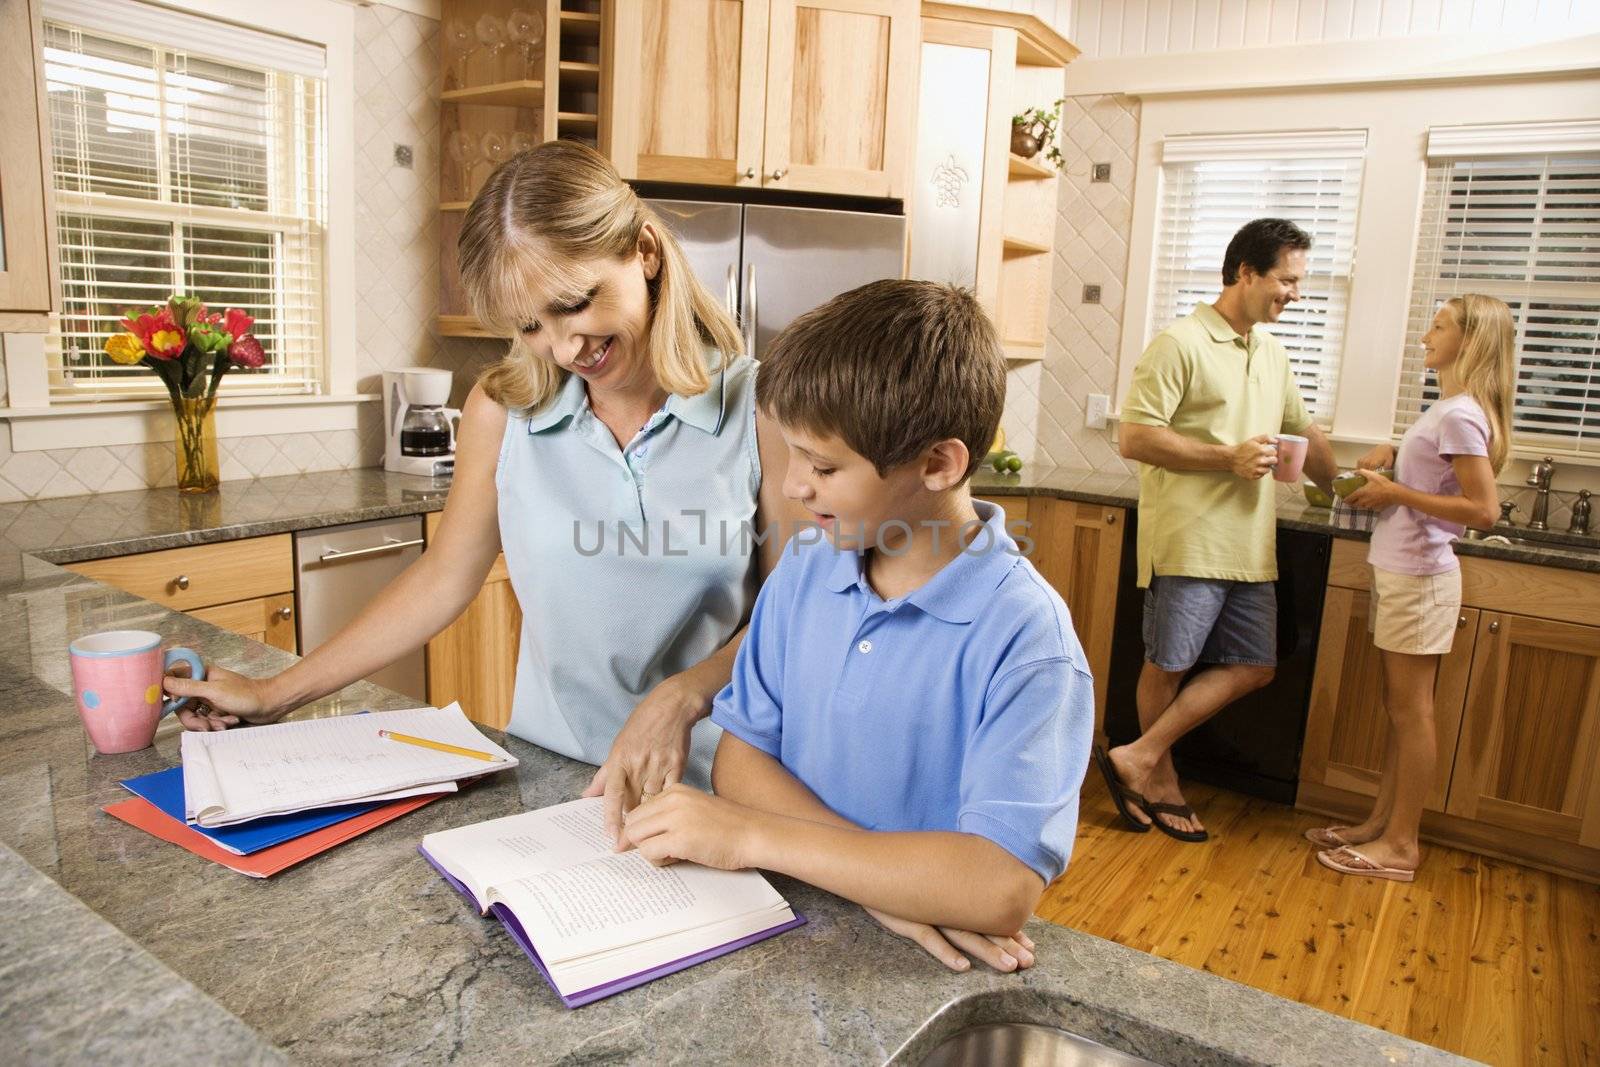 Caucasian family in kitchen doing homework and chatting.